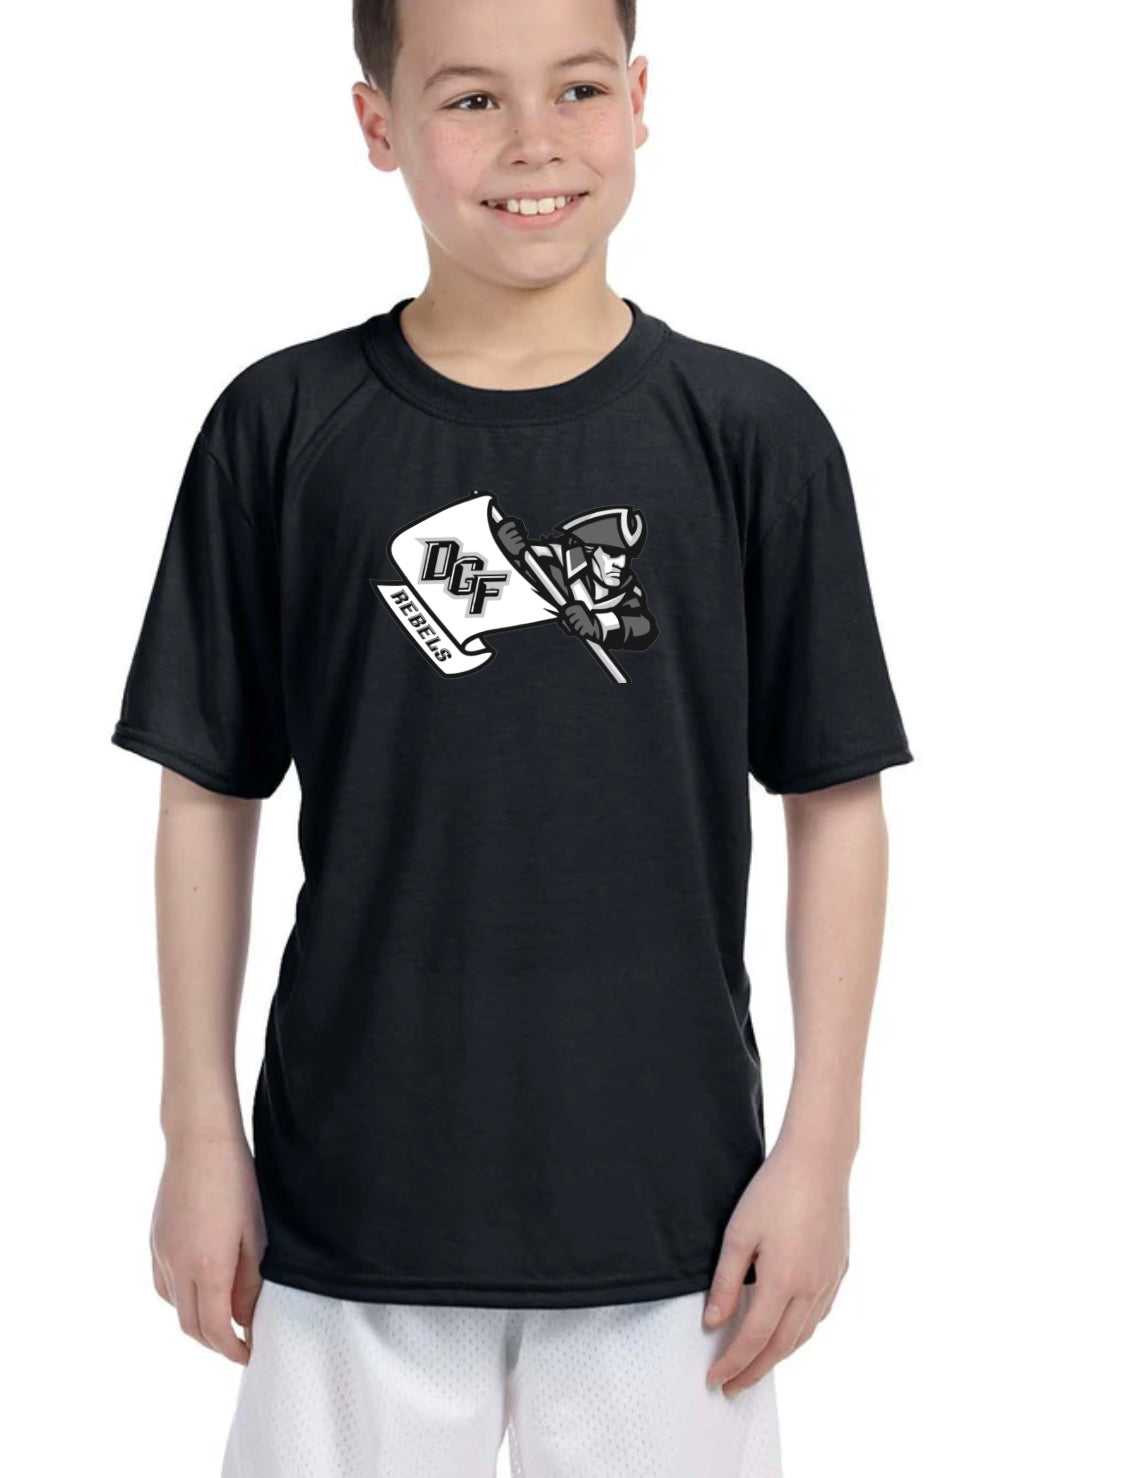 DGF Youth Dry Fit Tee